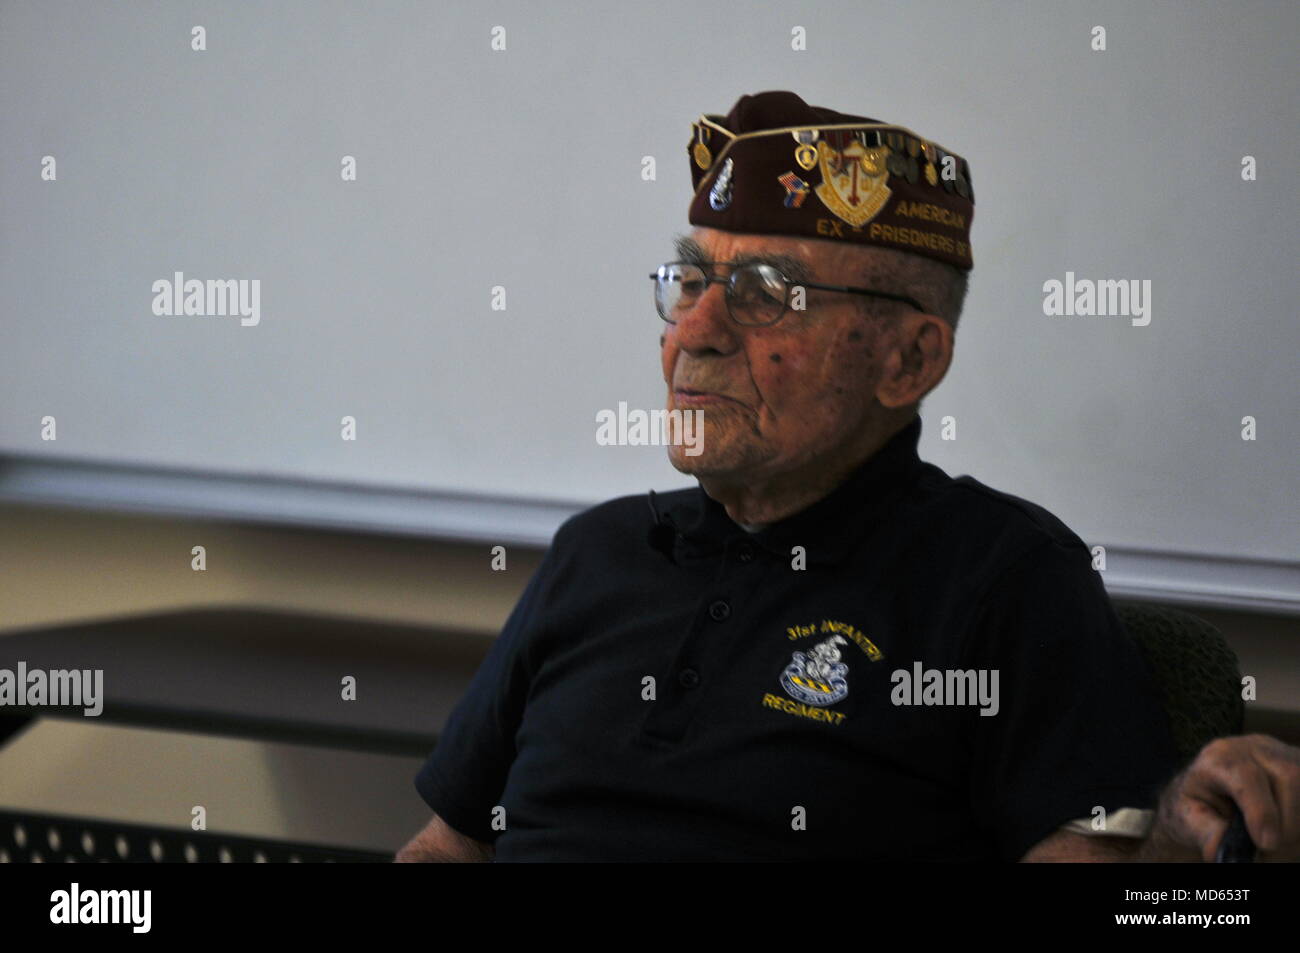 Paul Kerchum, a Chief Master Sgt. (Ret.) with the Air Force and the Army Air Corps, describes his experiences in World War II and his involvement in the Bataan Death March to a crowd of visitors at White Sands Missile Range, New Mexico, March 24, 2018.  Thousands of prisoners of war died in the Bataan Death March, a forced relocation of prisoners in April 1942 through inhospitable jungle, who were denied proper food, water and medical attention.  (U.S. Army photo by Pvt. Matthew J. Marcellus) Stock Photo